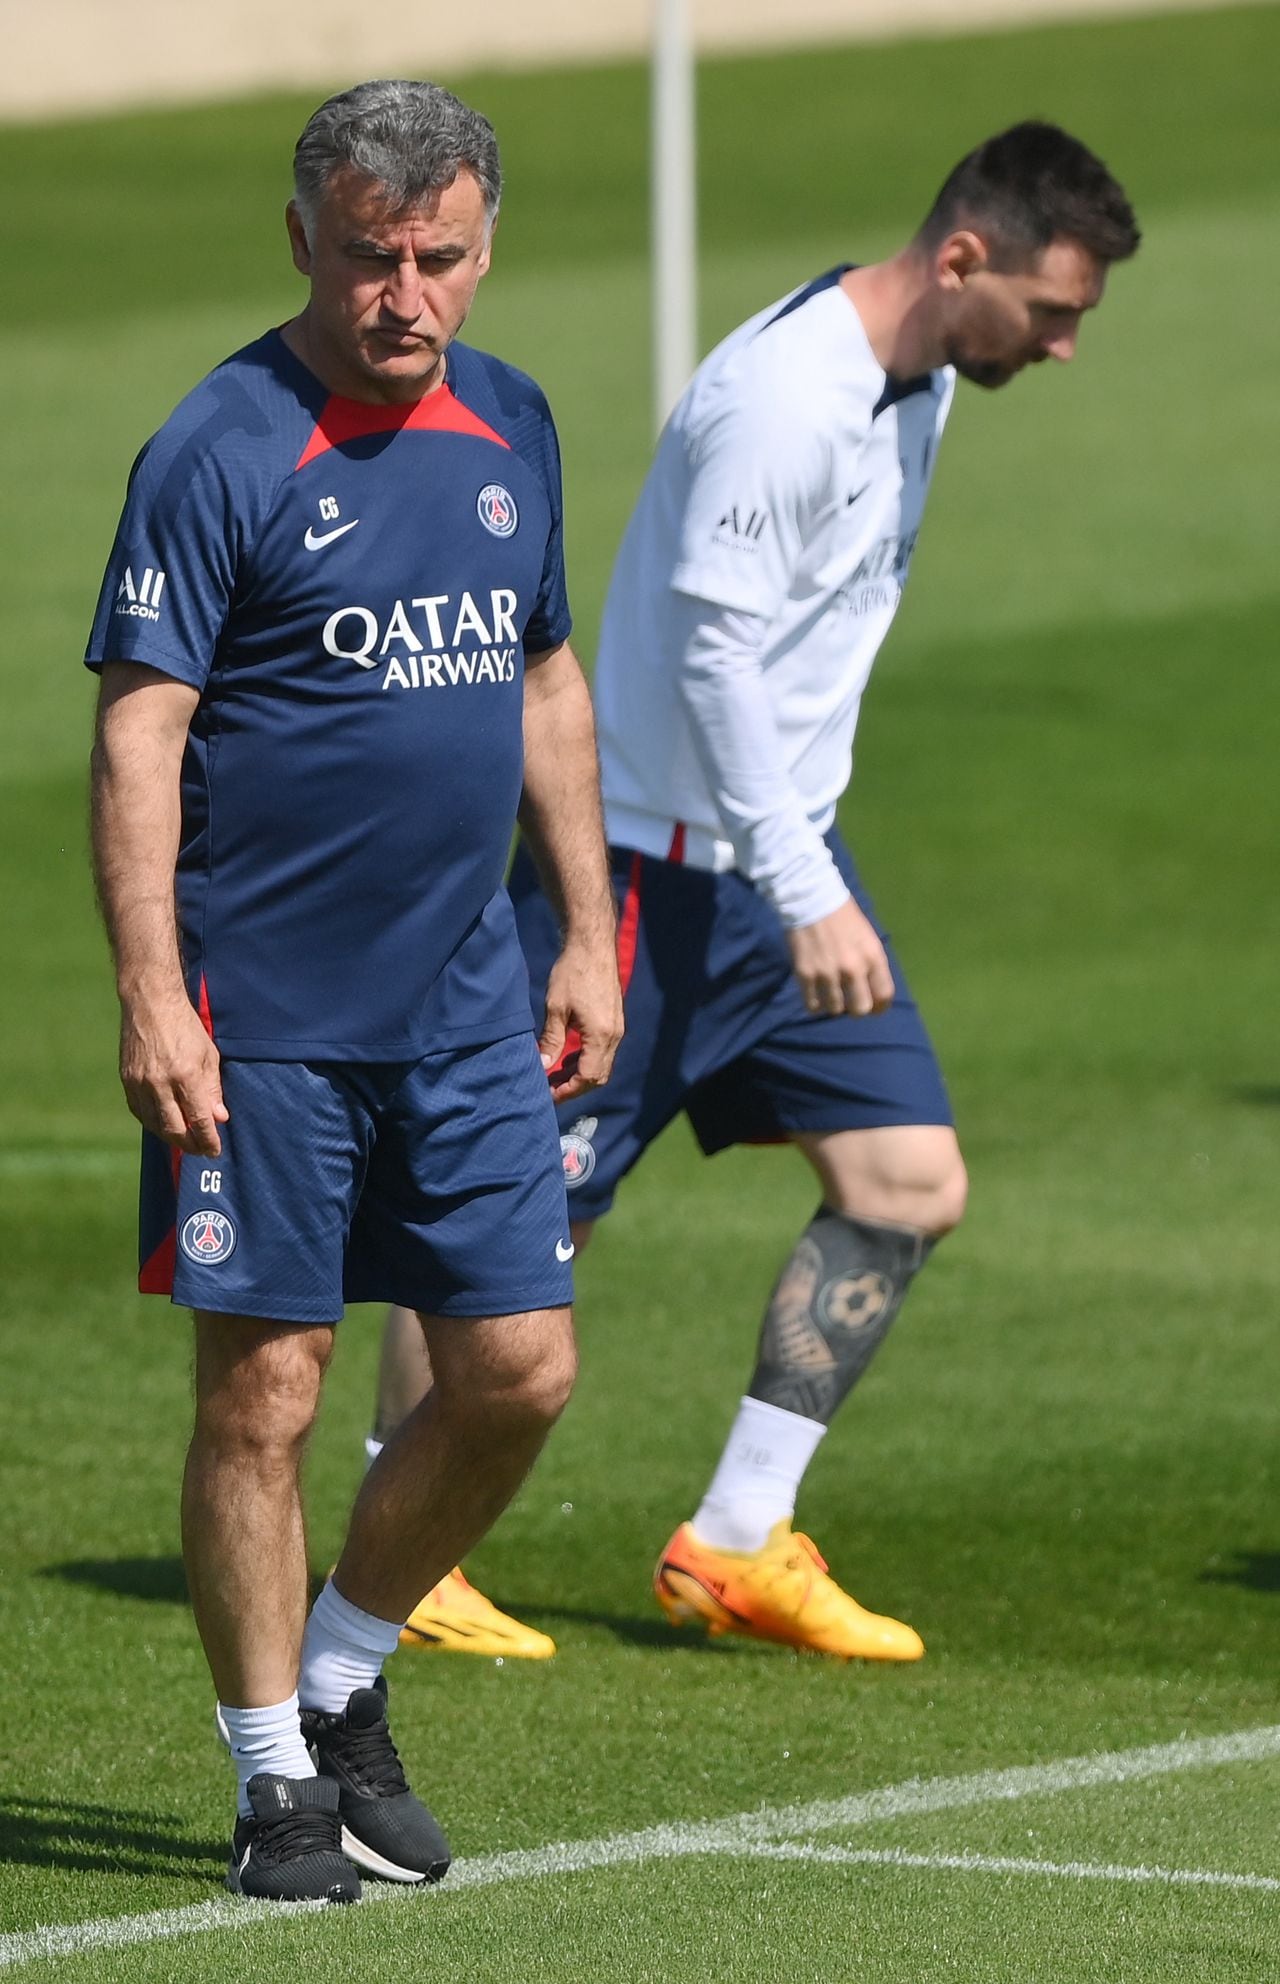 Paris Saint-Germain's French head coach Christophe Galtier (L) walks on the pitch next to Paris Saint-Germain's Argentine forward Lionel Messi during a training session at club's training ground in Saint-Germain-en-Laye, west of Paris on June 1, 2023, two days prior to the L1 football match against Clermont. (Photo by FRANCK FIFE / AFP)